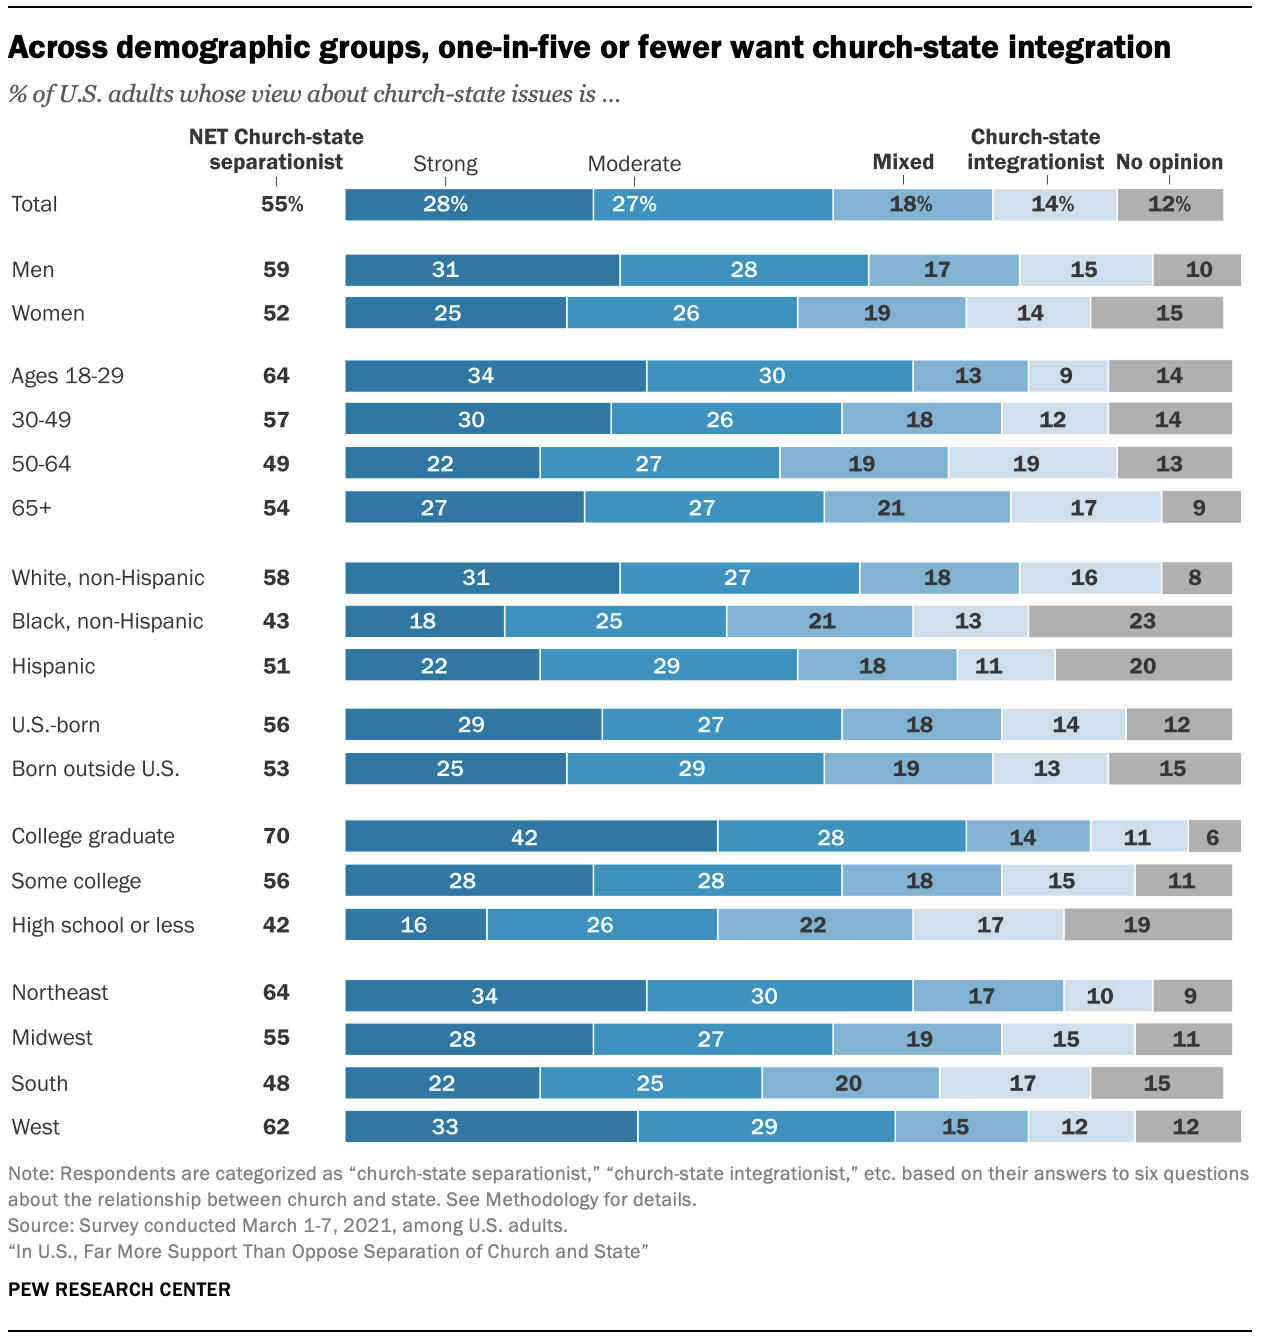 Across demographic groups, one-in-five or fewer want church-state integration